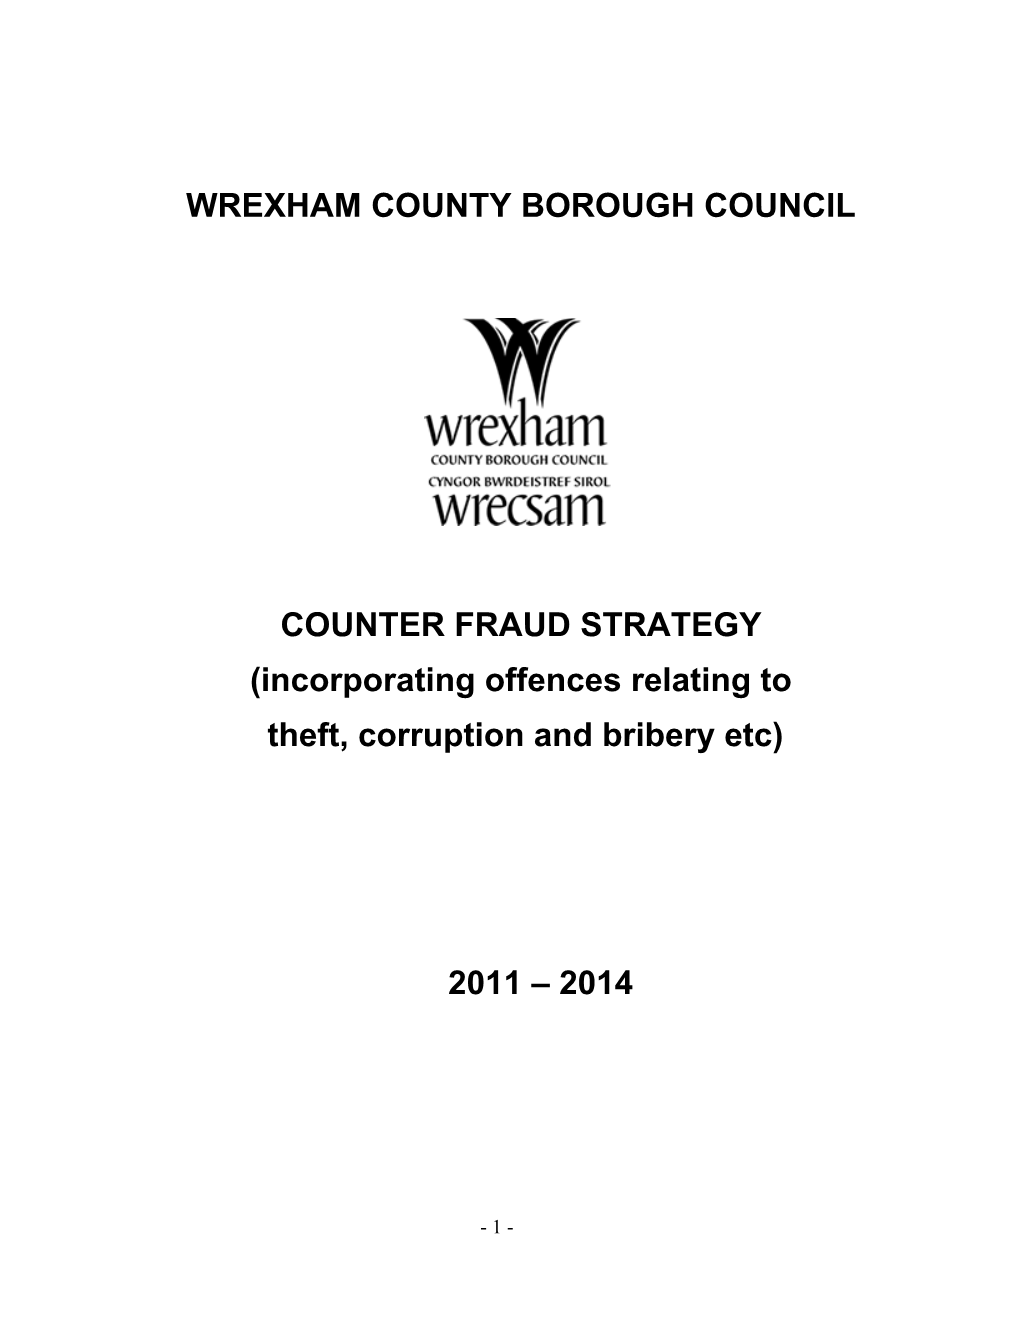 Counter Fraud Strategy 2011-2014